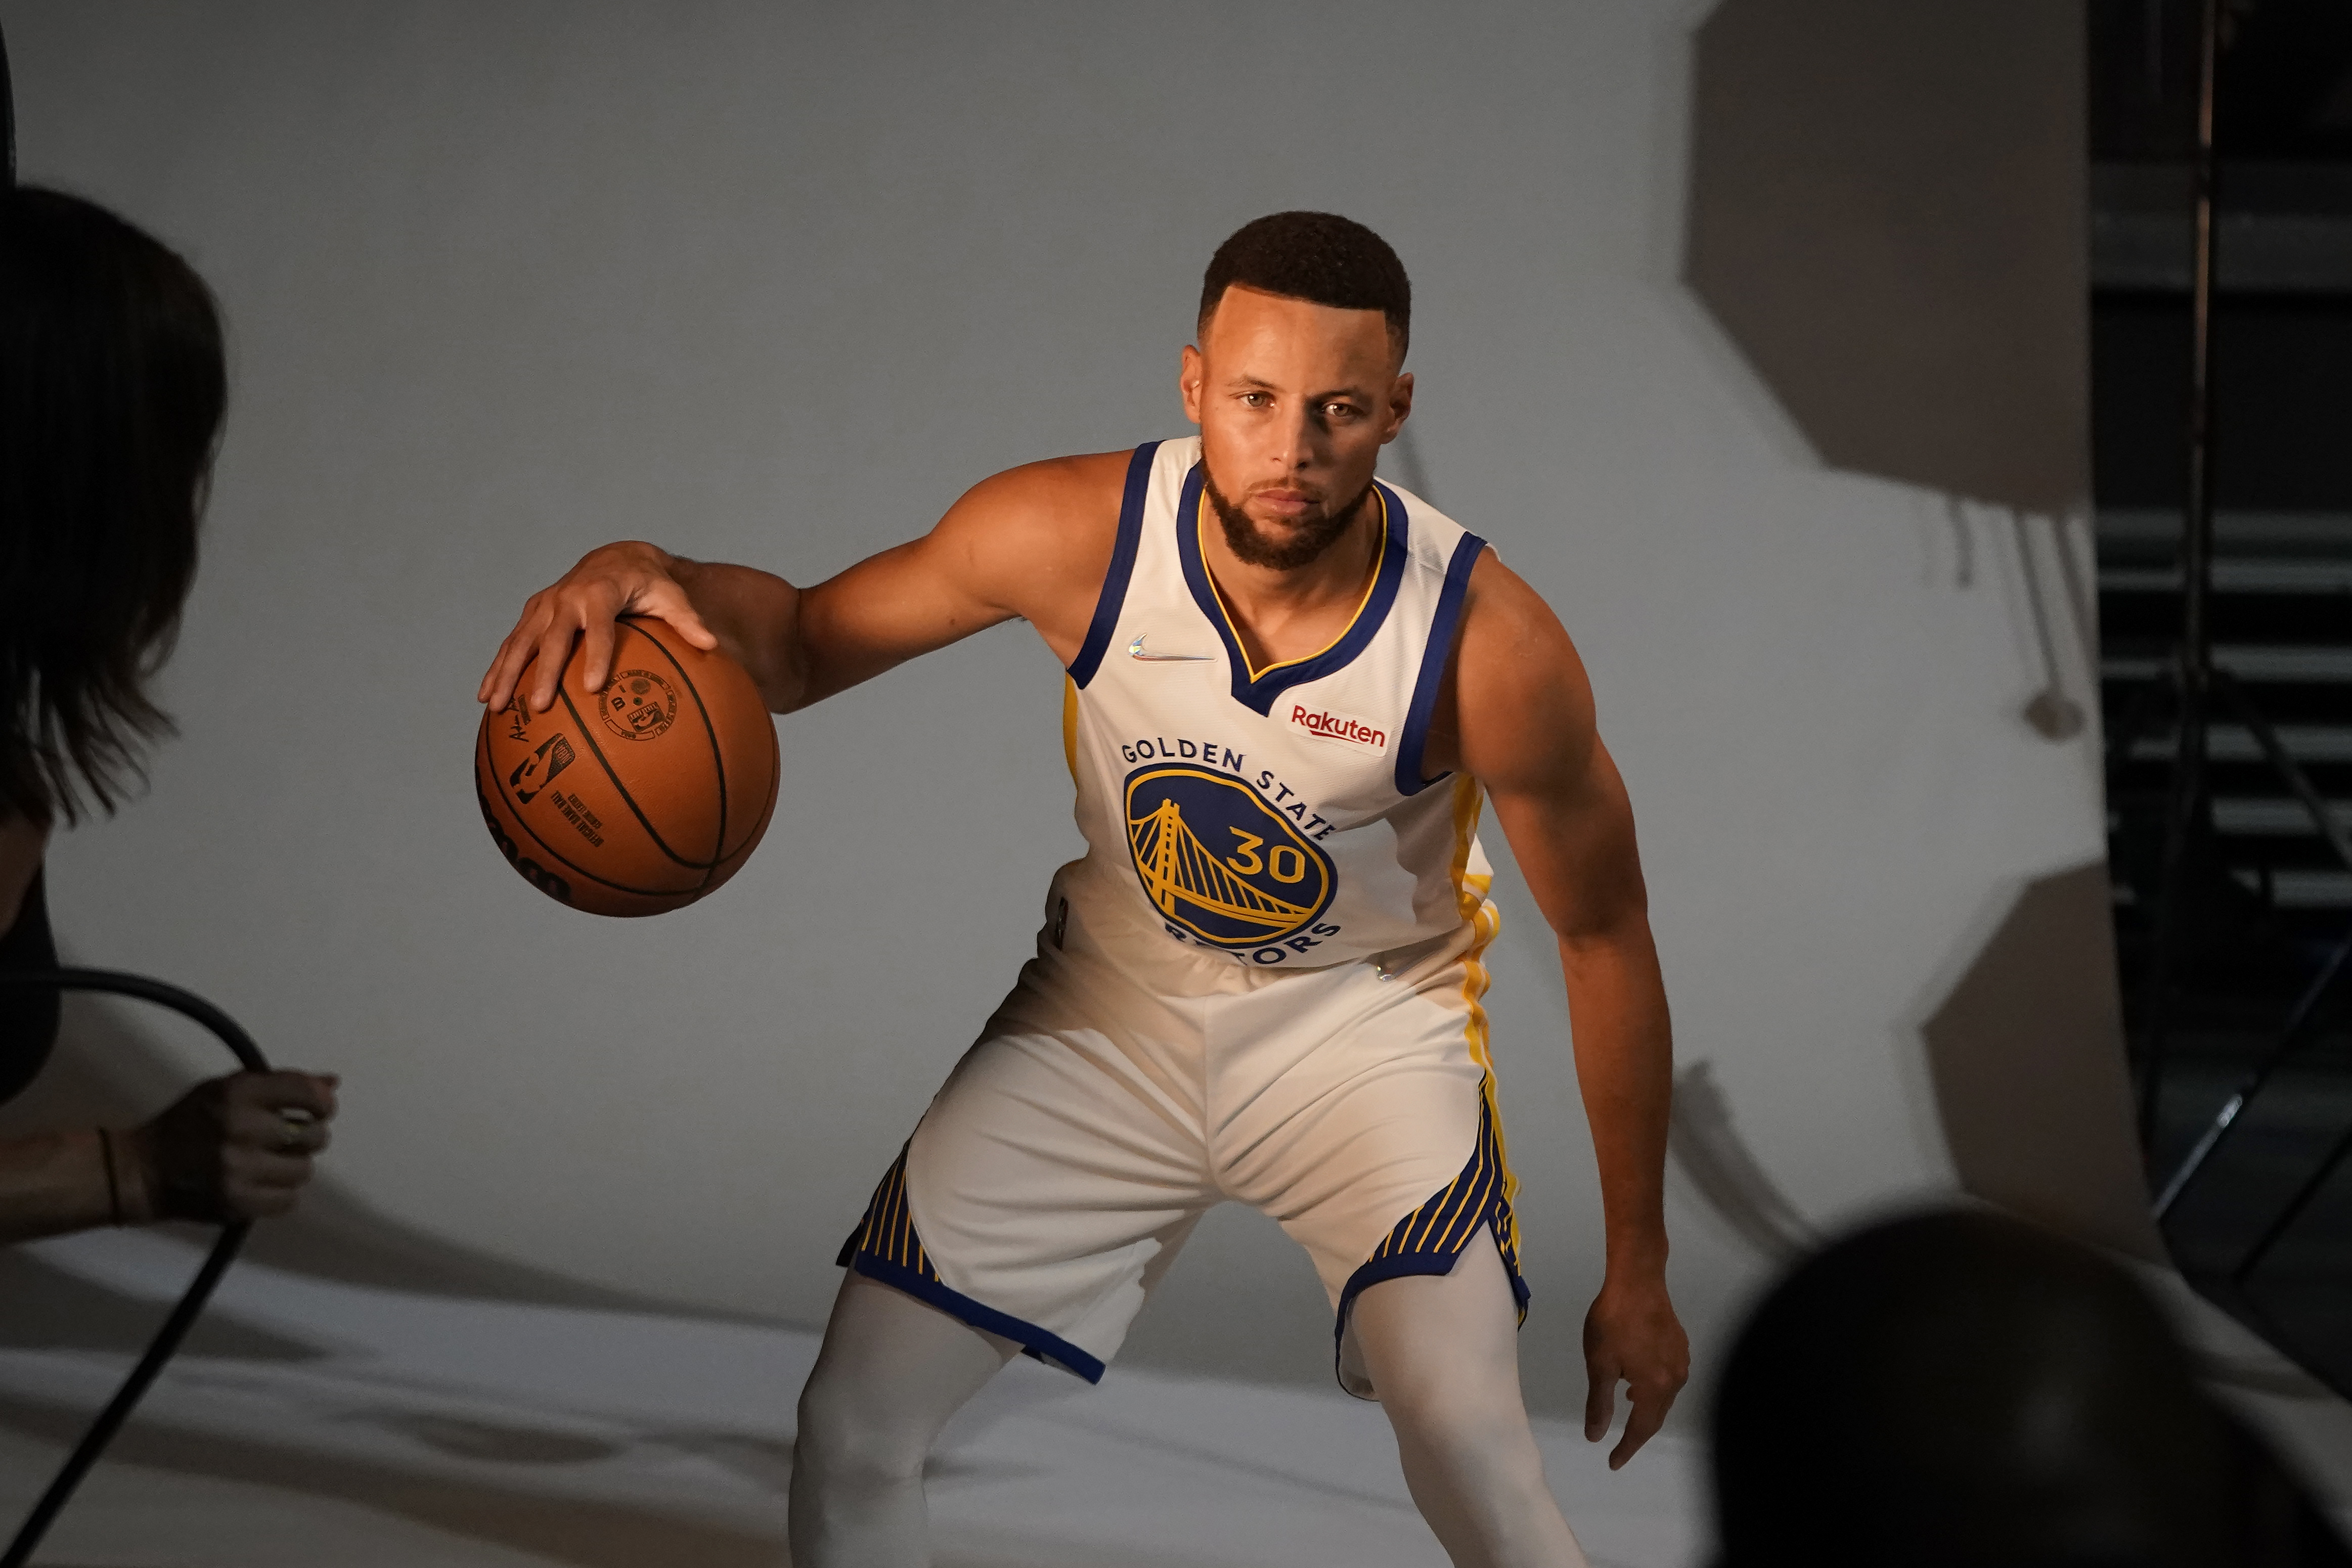 stephen curry 2021